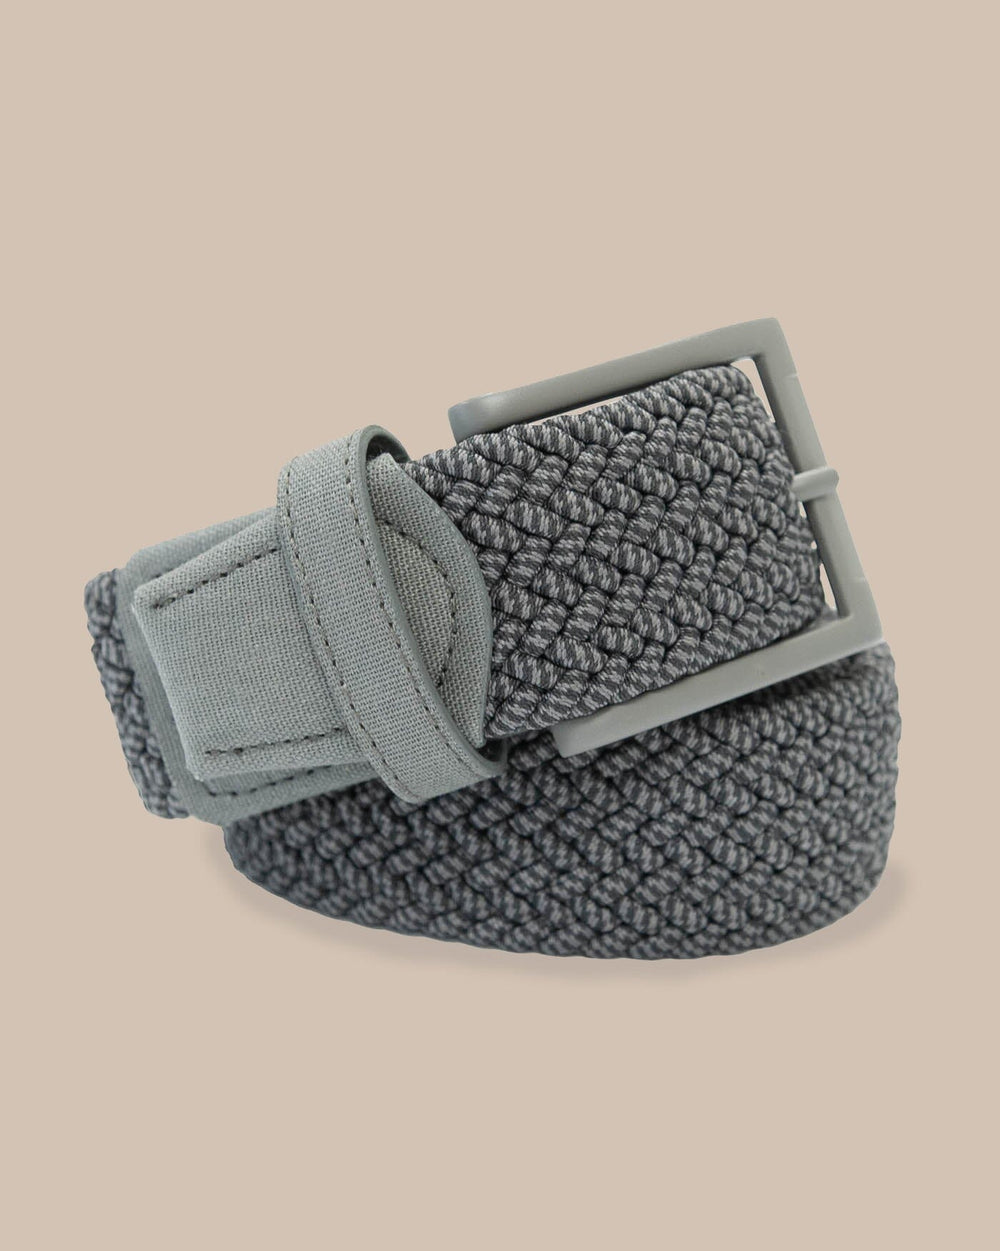 The front view of the Southern Tide Caddie Braided Belt by Southern Tide - Castle Rock